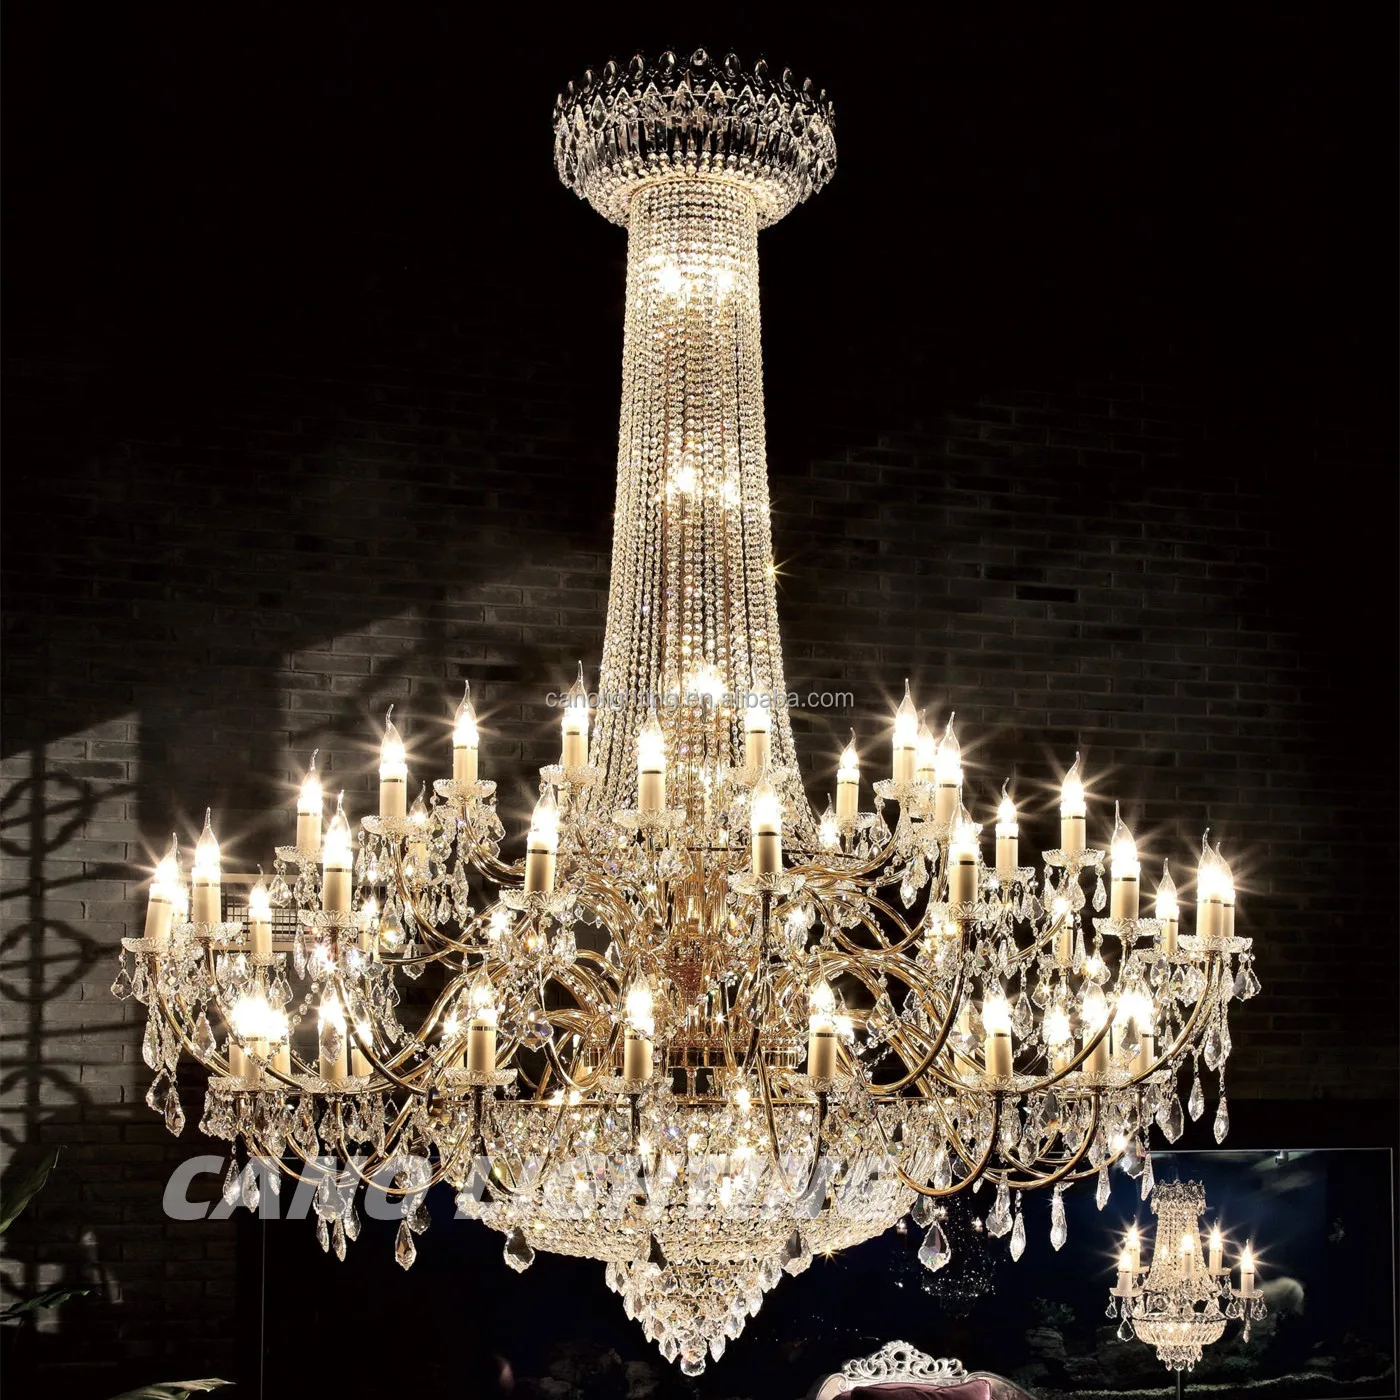 French Empire Wedding K9 Crystal Chandelier Luxury Candles Decoration Hotel Lobby Vintage Large Maria Theresa Chandelier